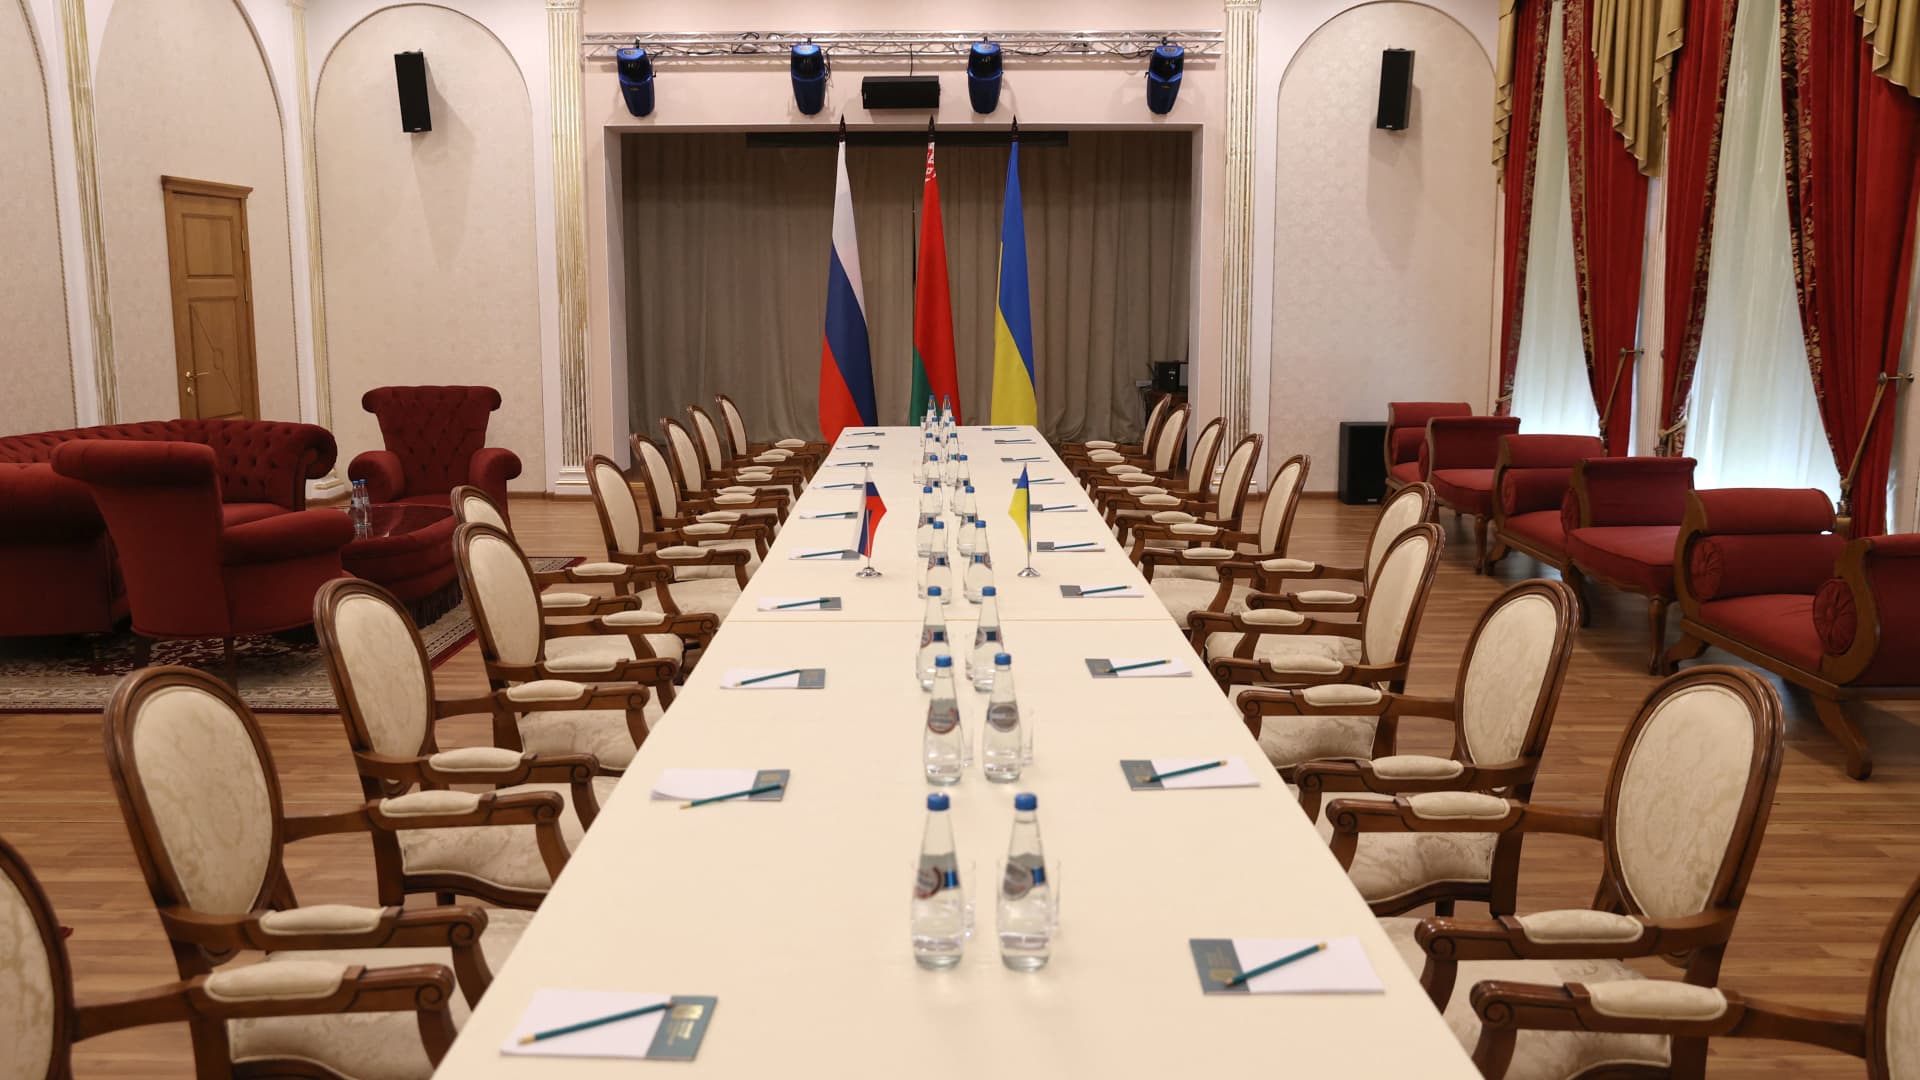 A view of the venue that will host talks between delegations from Ukraine and Russia in Belarus' Gomel region on February 28, 2022, following the Russian invasion of Ukraine.